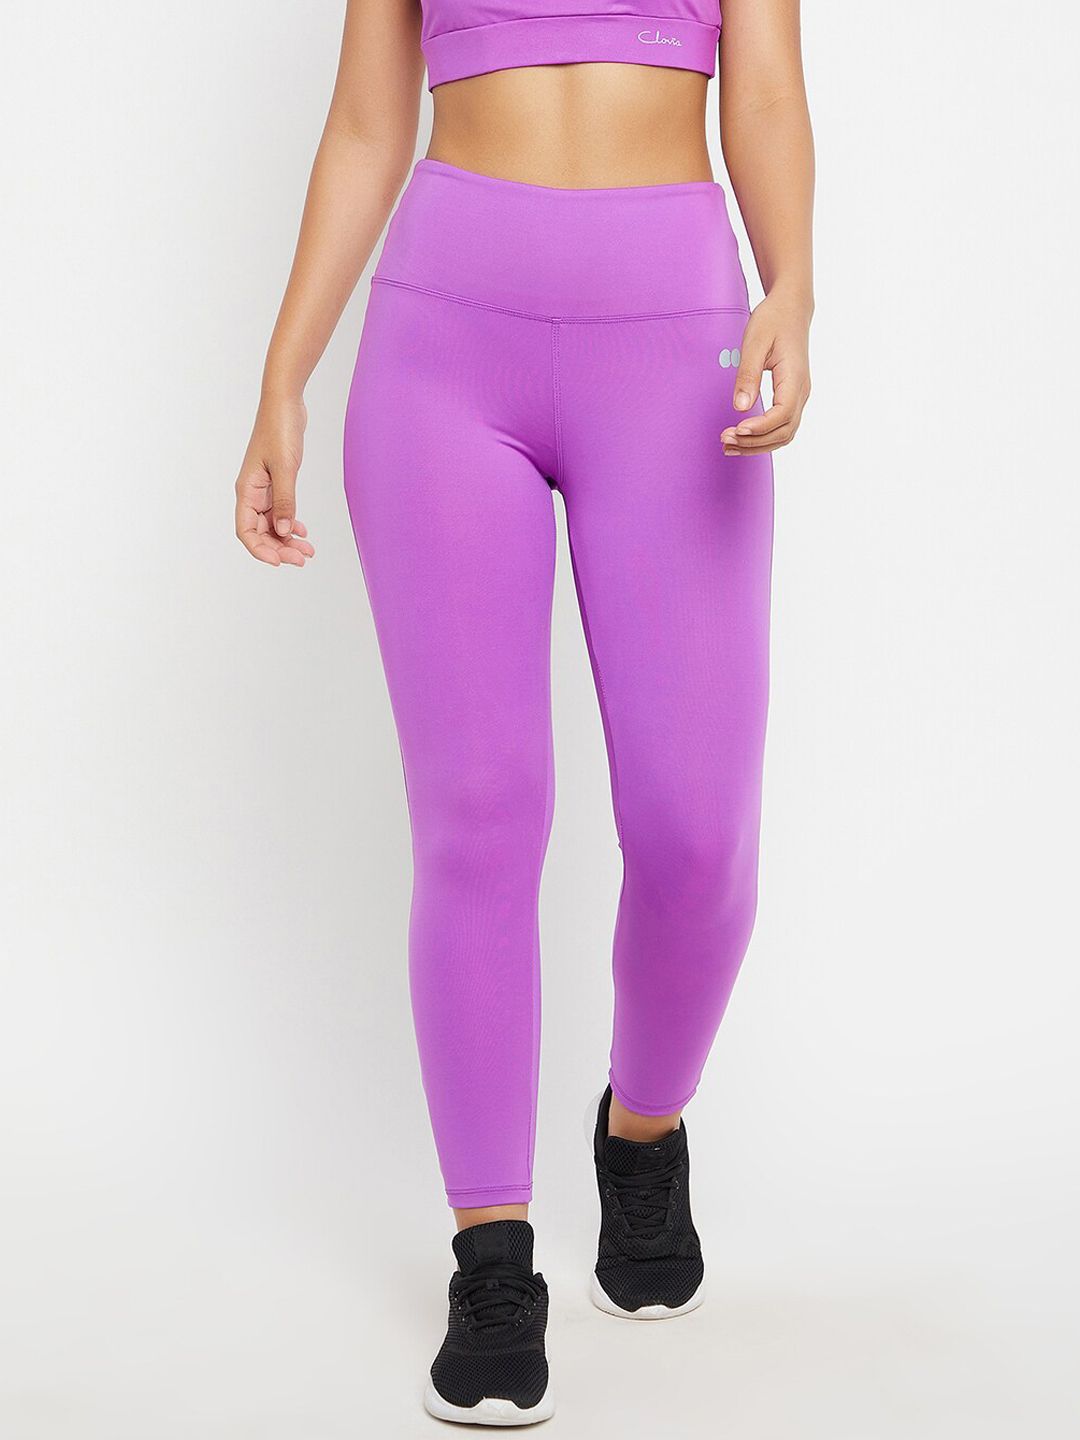 Clovia Women Purple Solid Snug Fit Active Wear Ankle-Length Tights Price in India